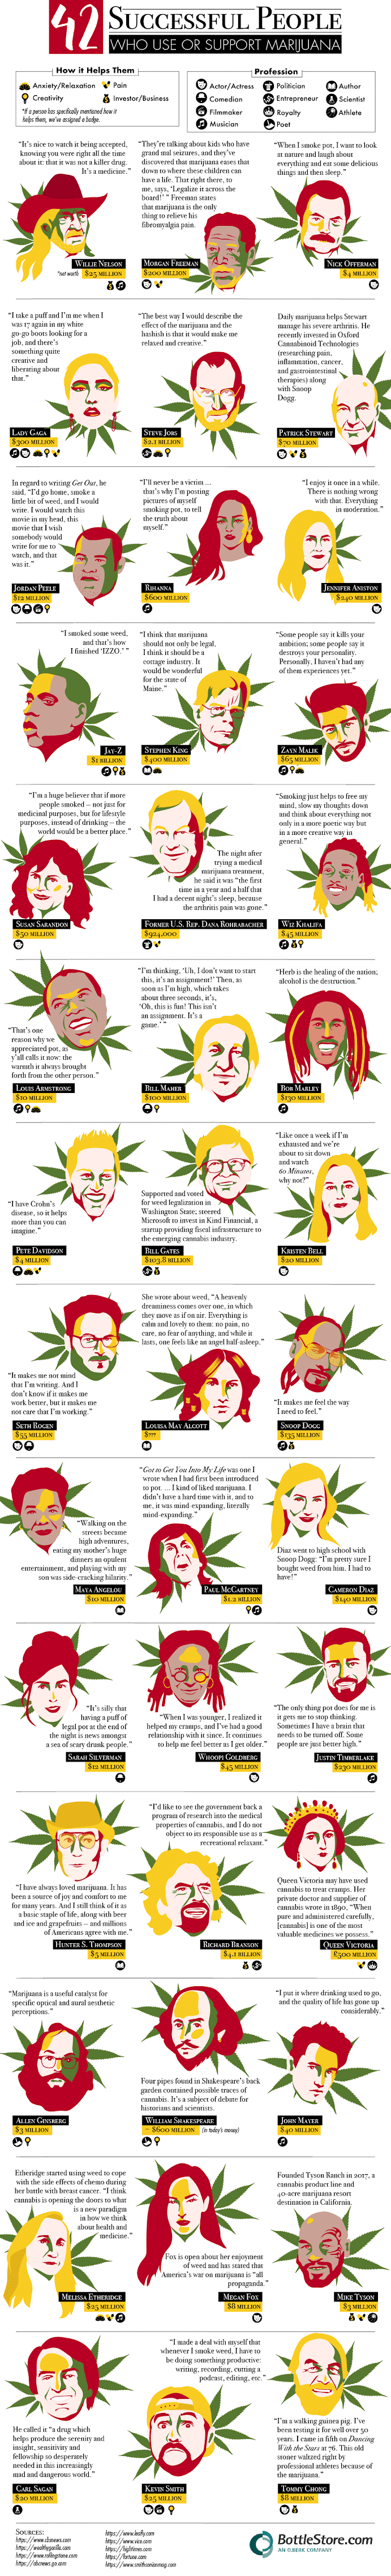 42 Successful People Who Use or Support Marijuana 